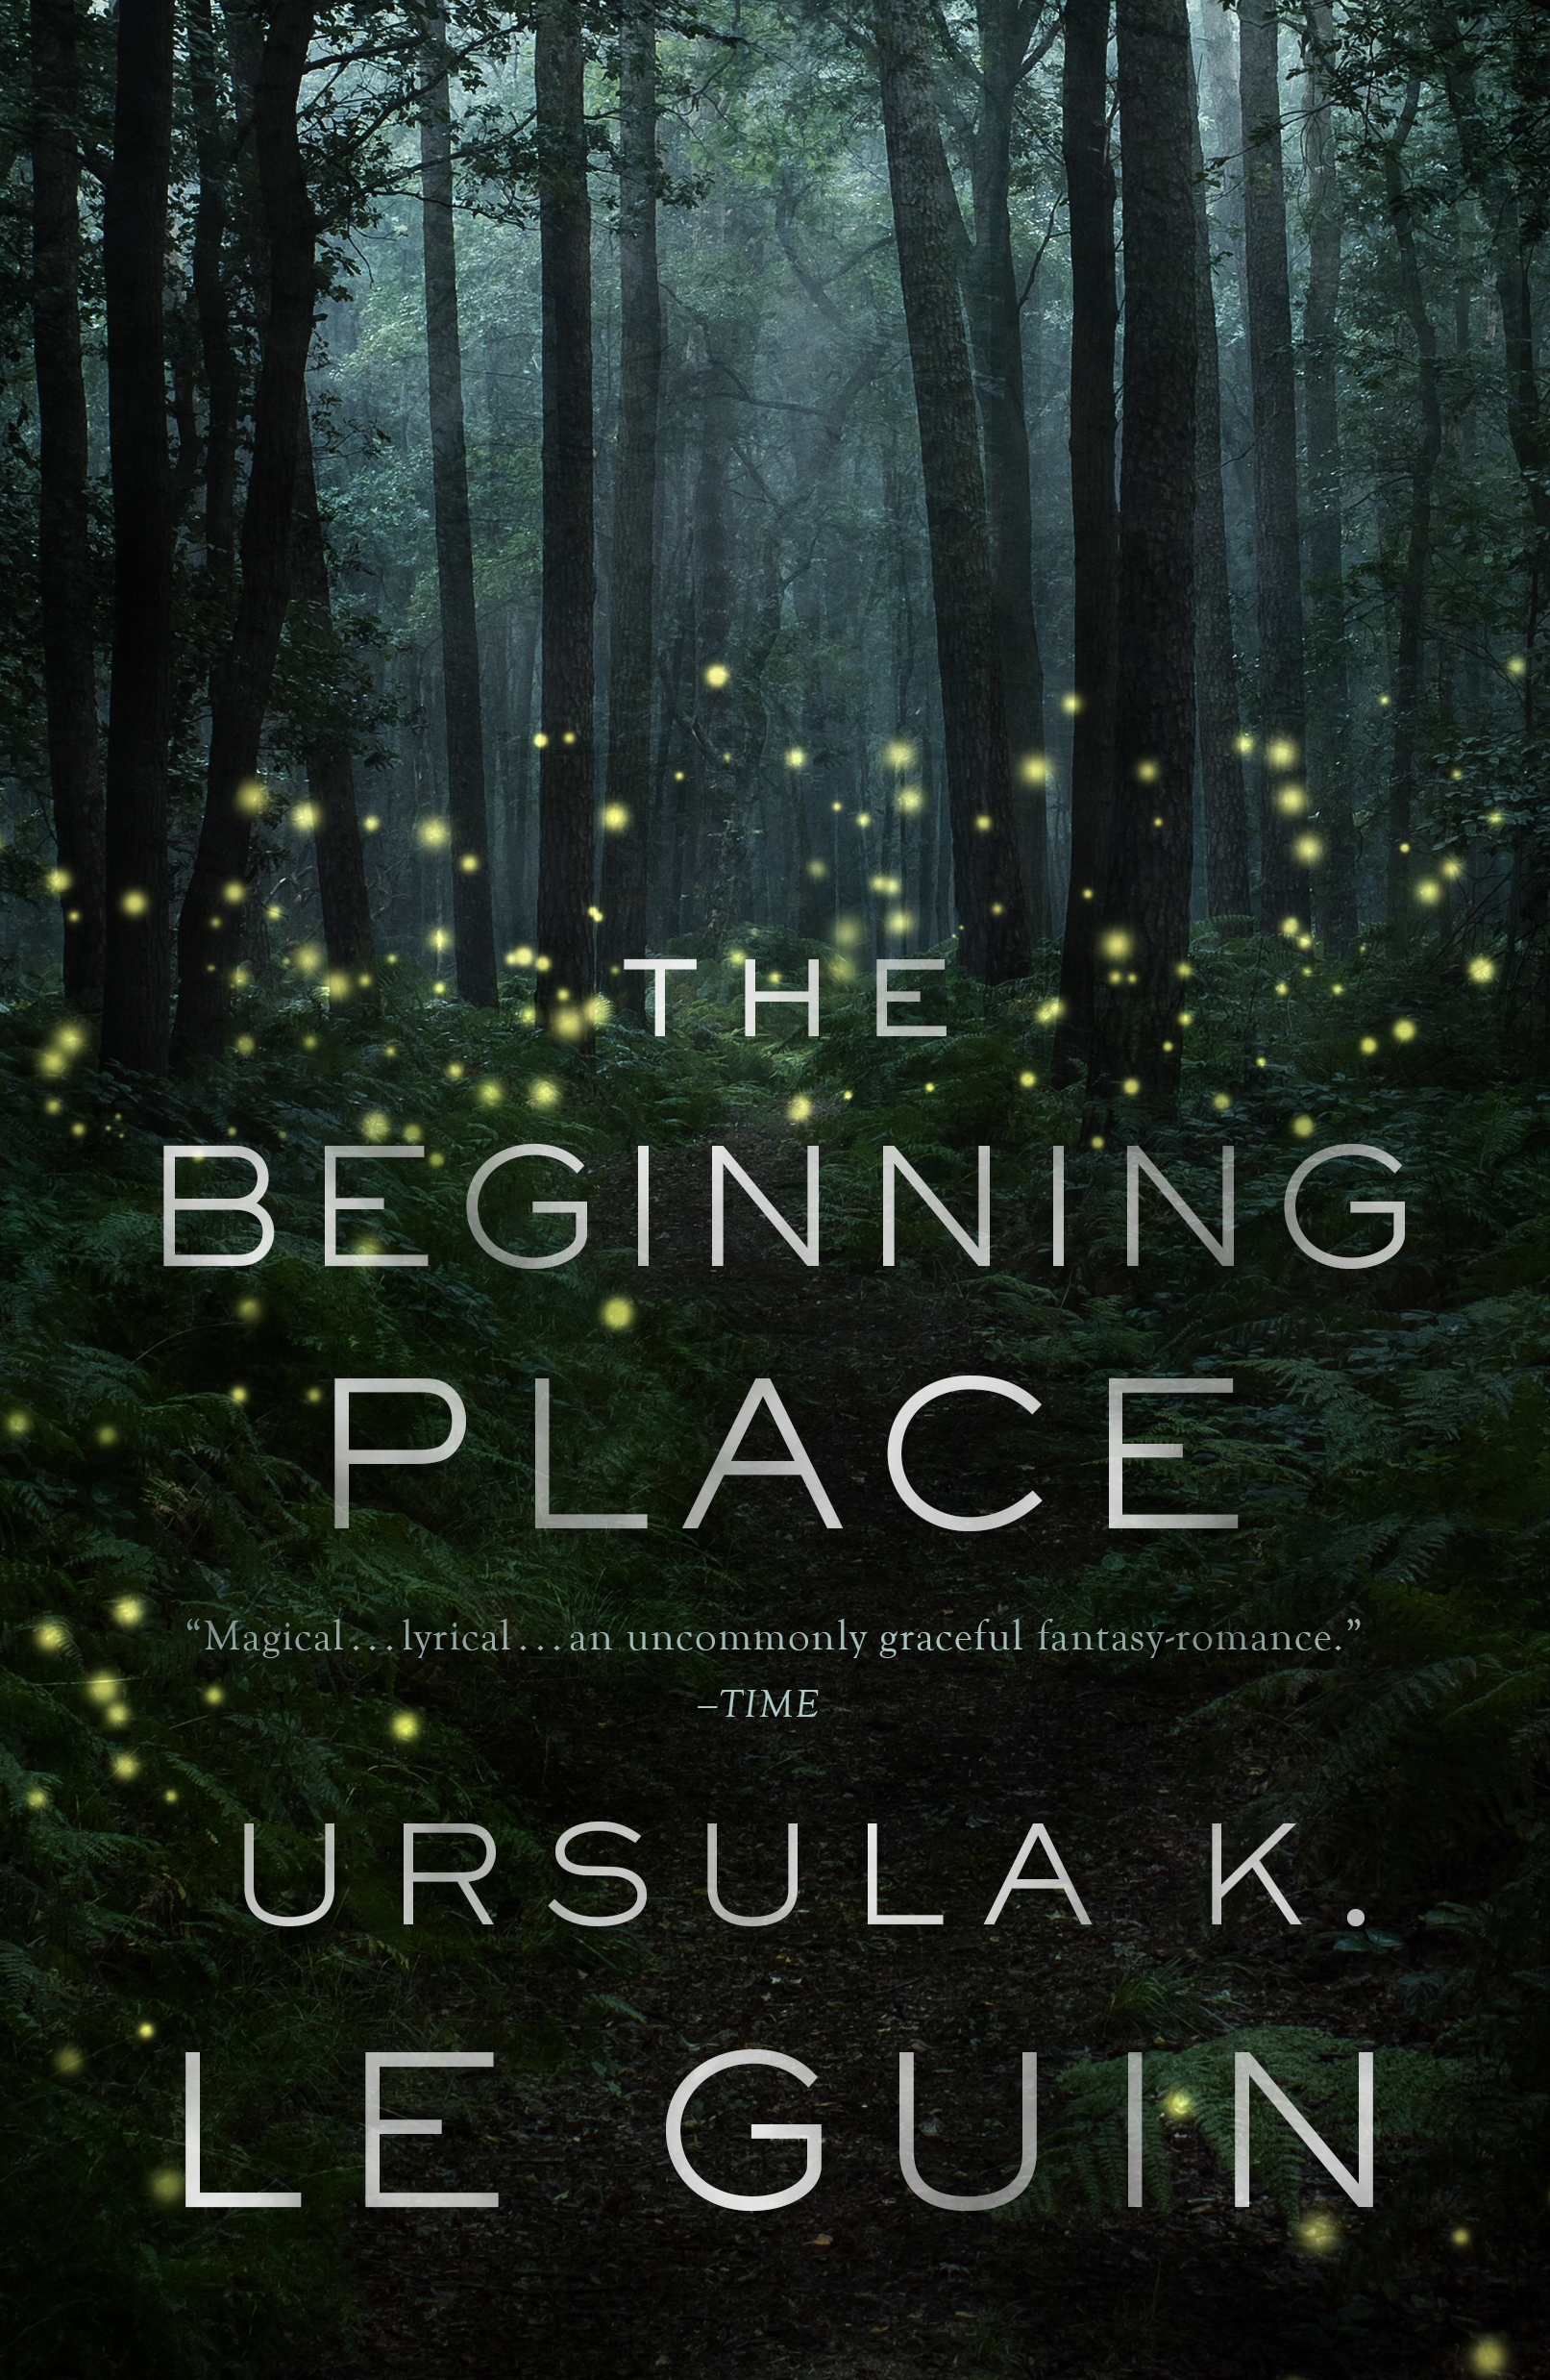 The Beginning Place : A Novel by Ursula K. Le Guin